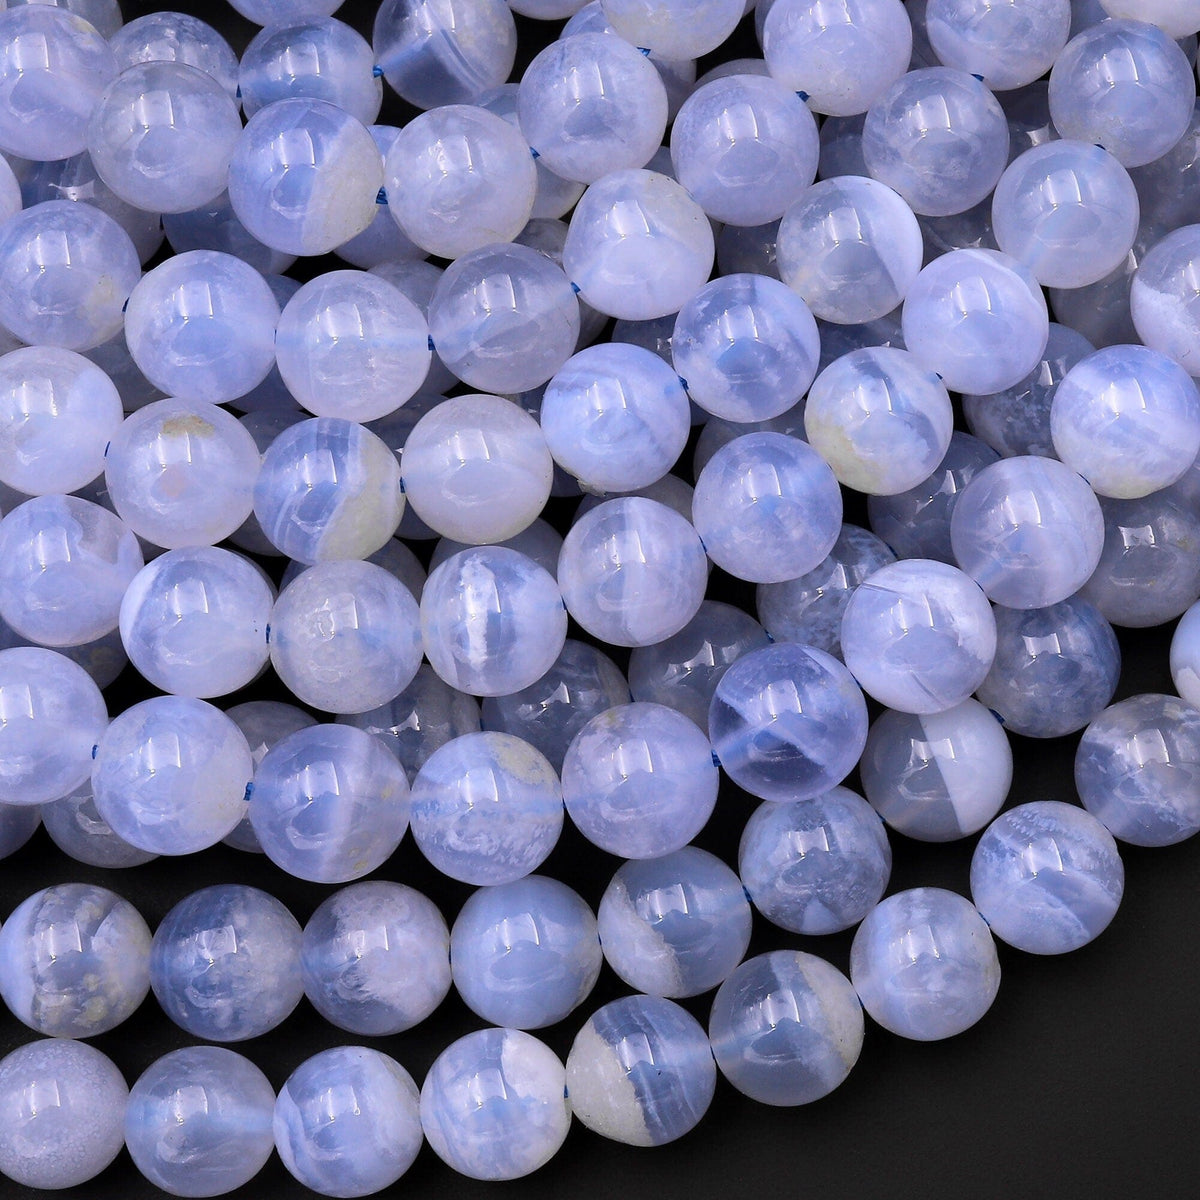 3 Sizes Coloured Blue Agate Beads, Gemstone Agate, 6mm 8mm 10mm Round  Beads, Mala, Necklace Earrings Diy Wholesale Bulk -  Israel